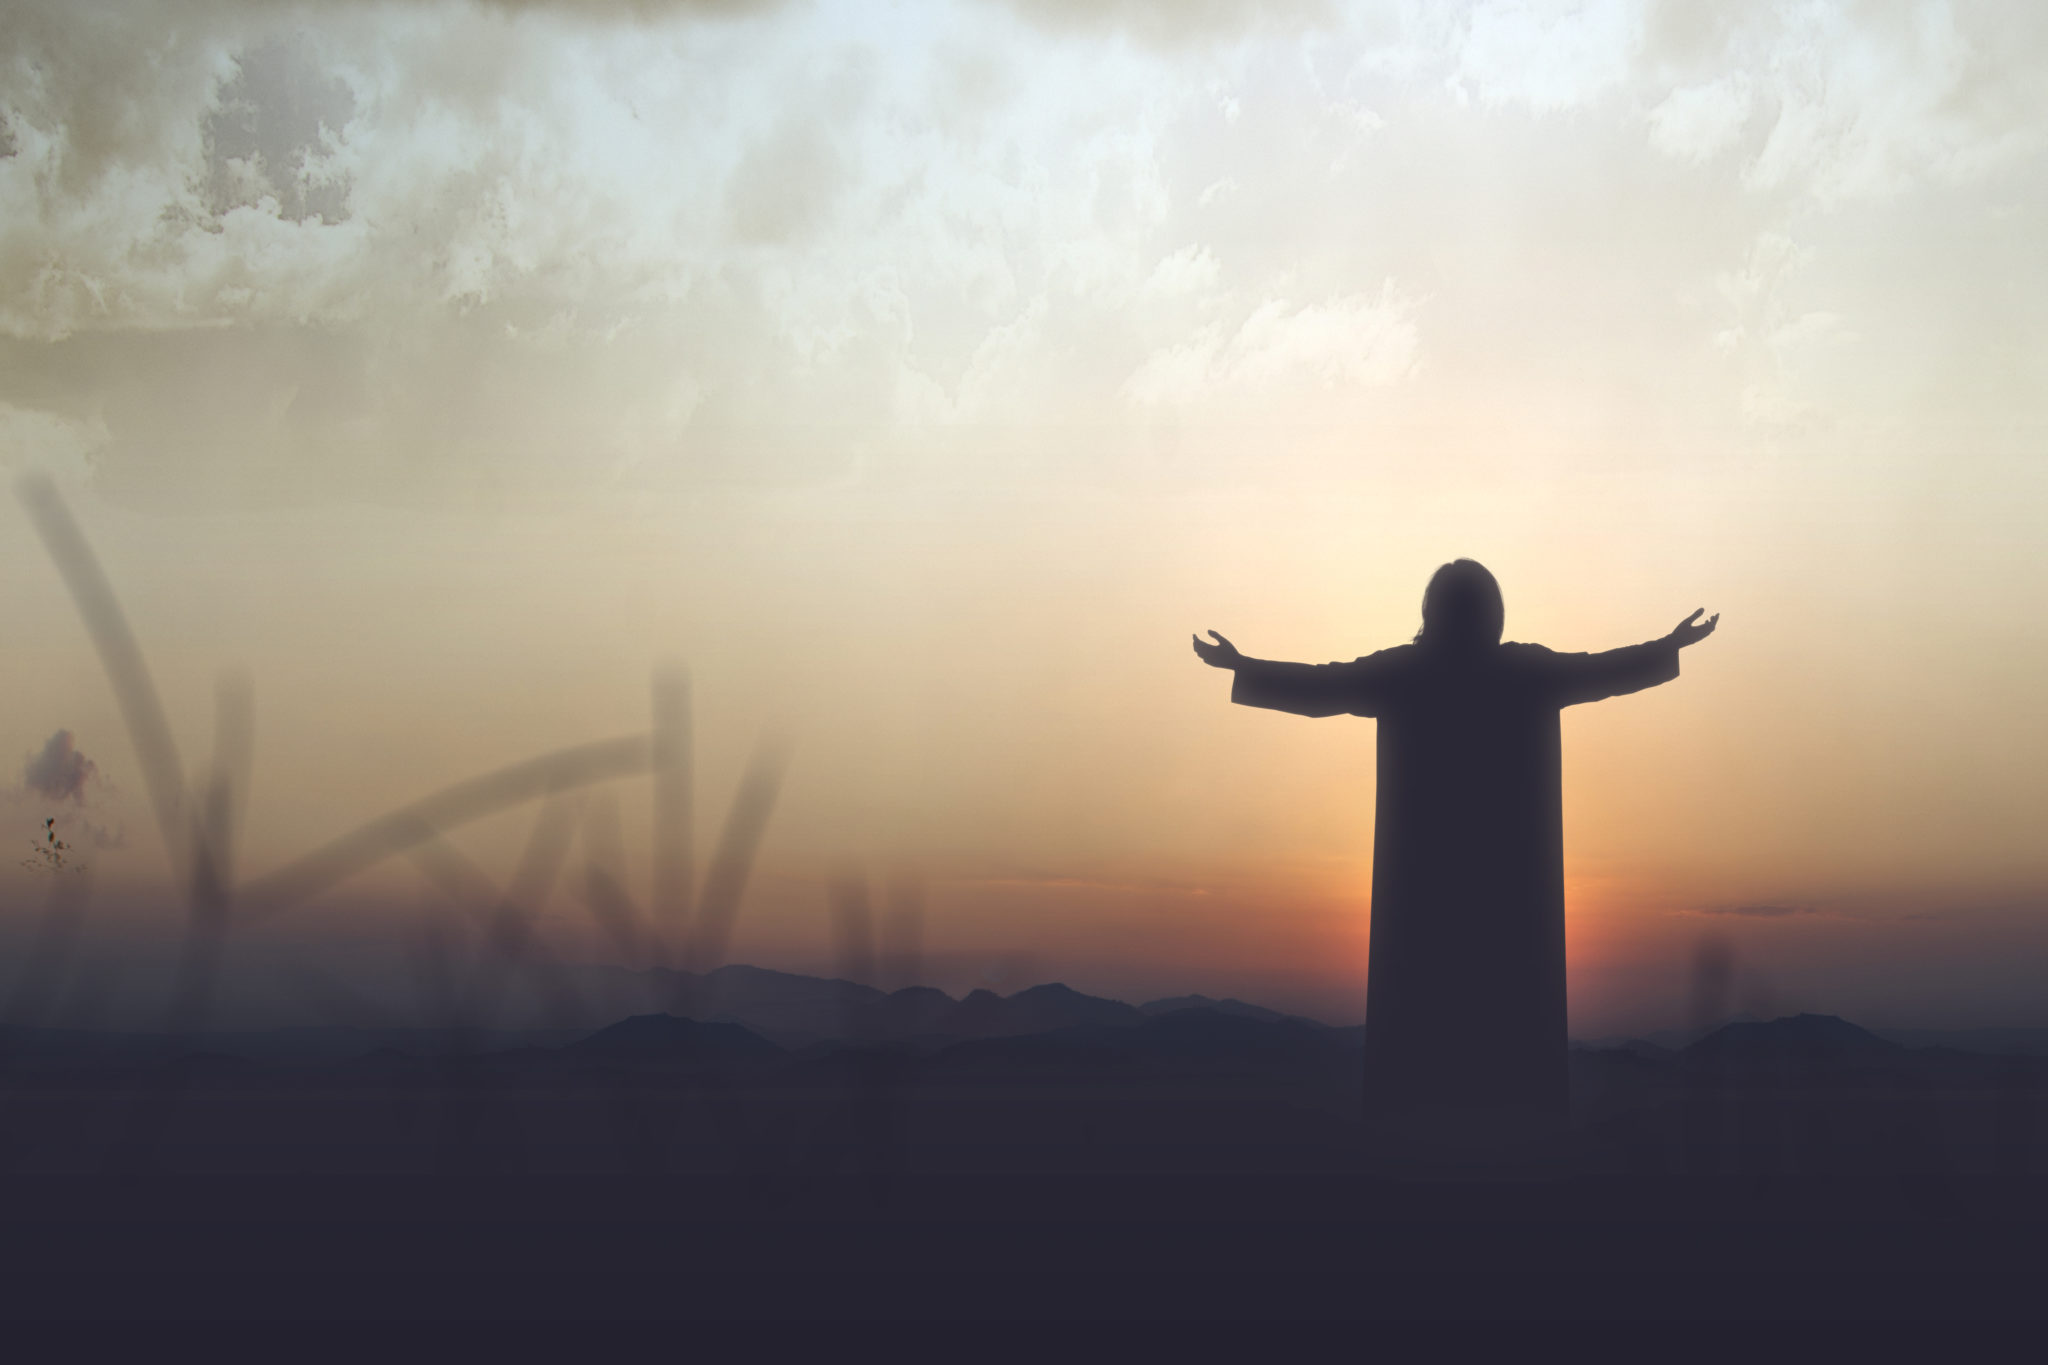 Rear,View,Silhouette,Of,Jesus,Christ,Raised,Hands,And,Praying